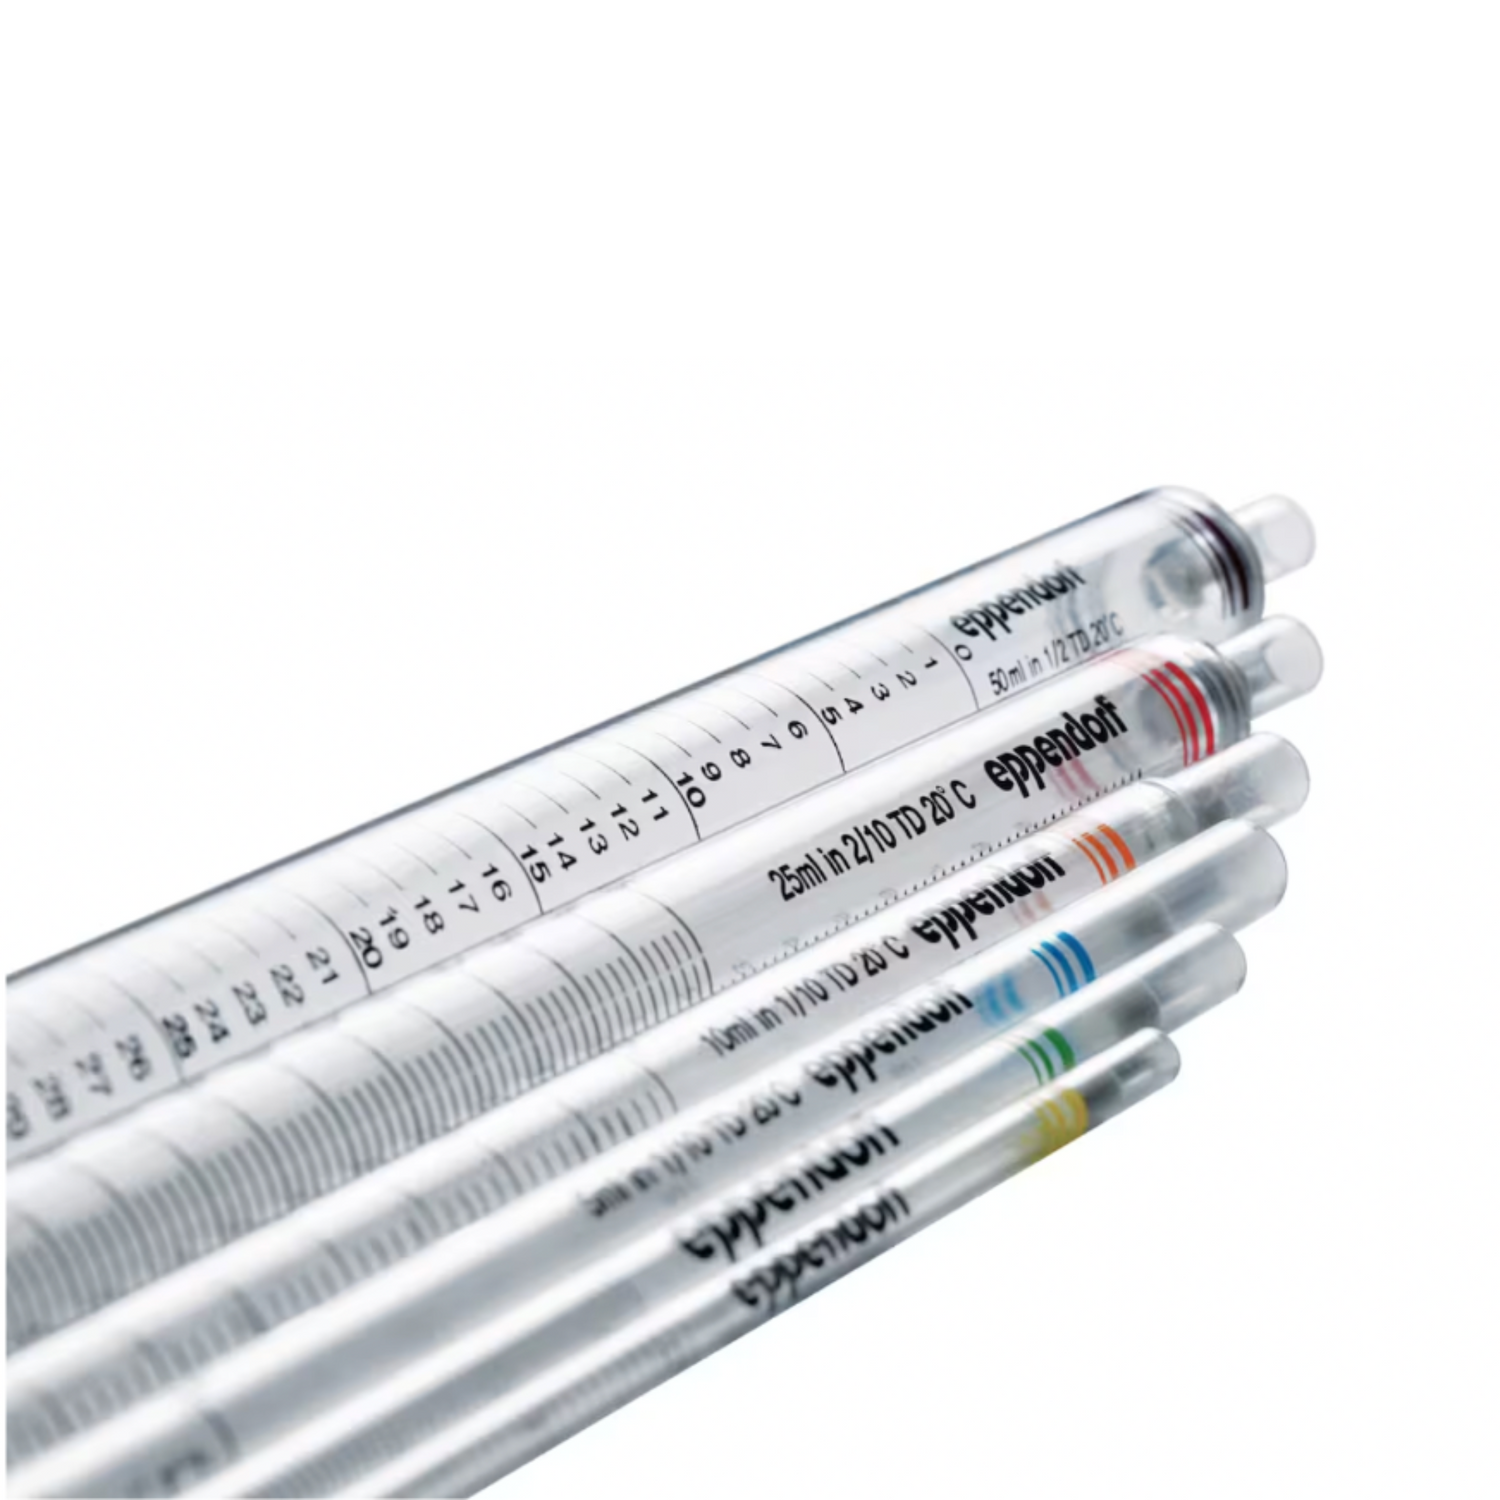 Serological pipets